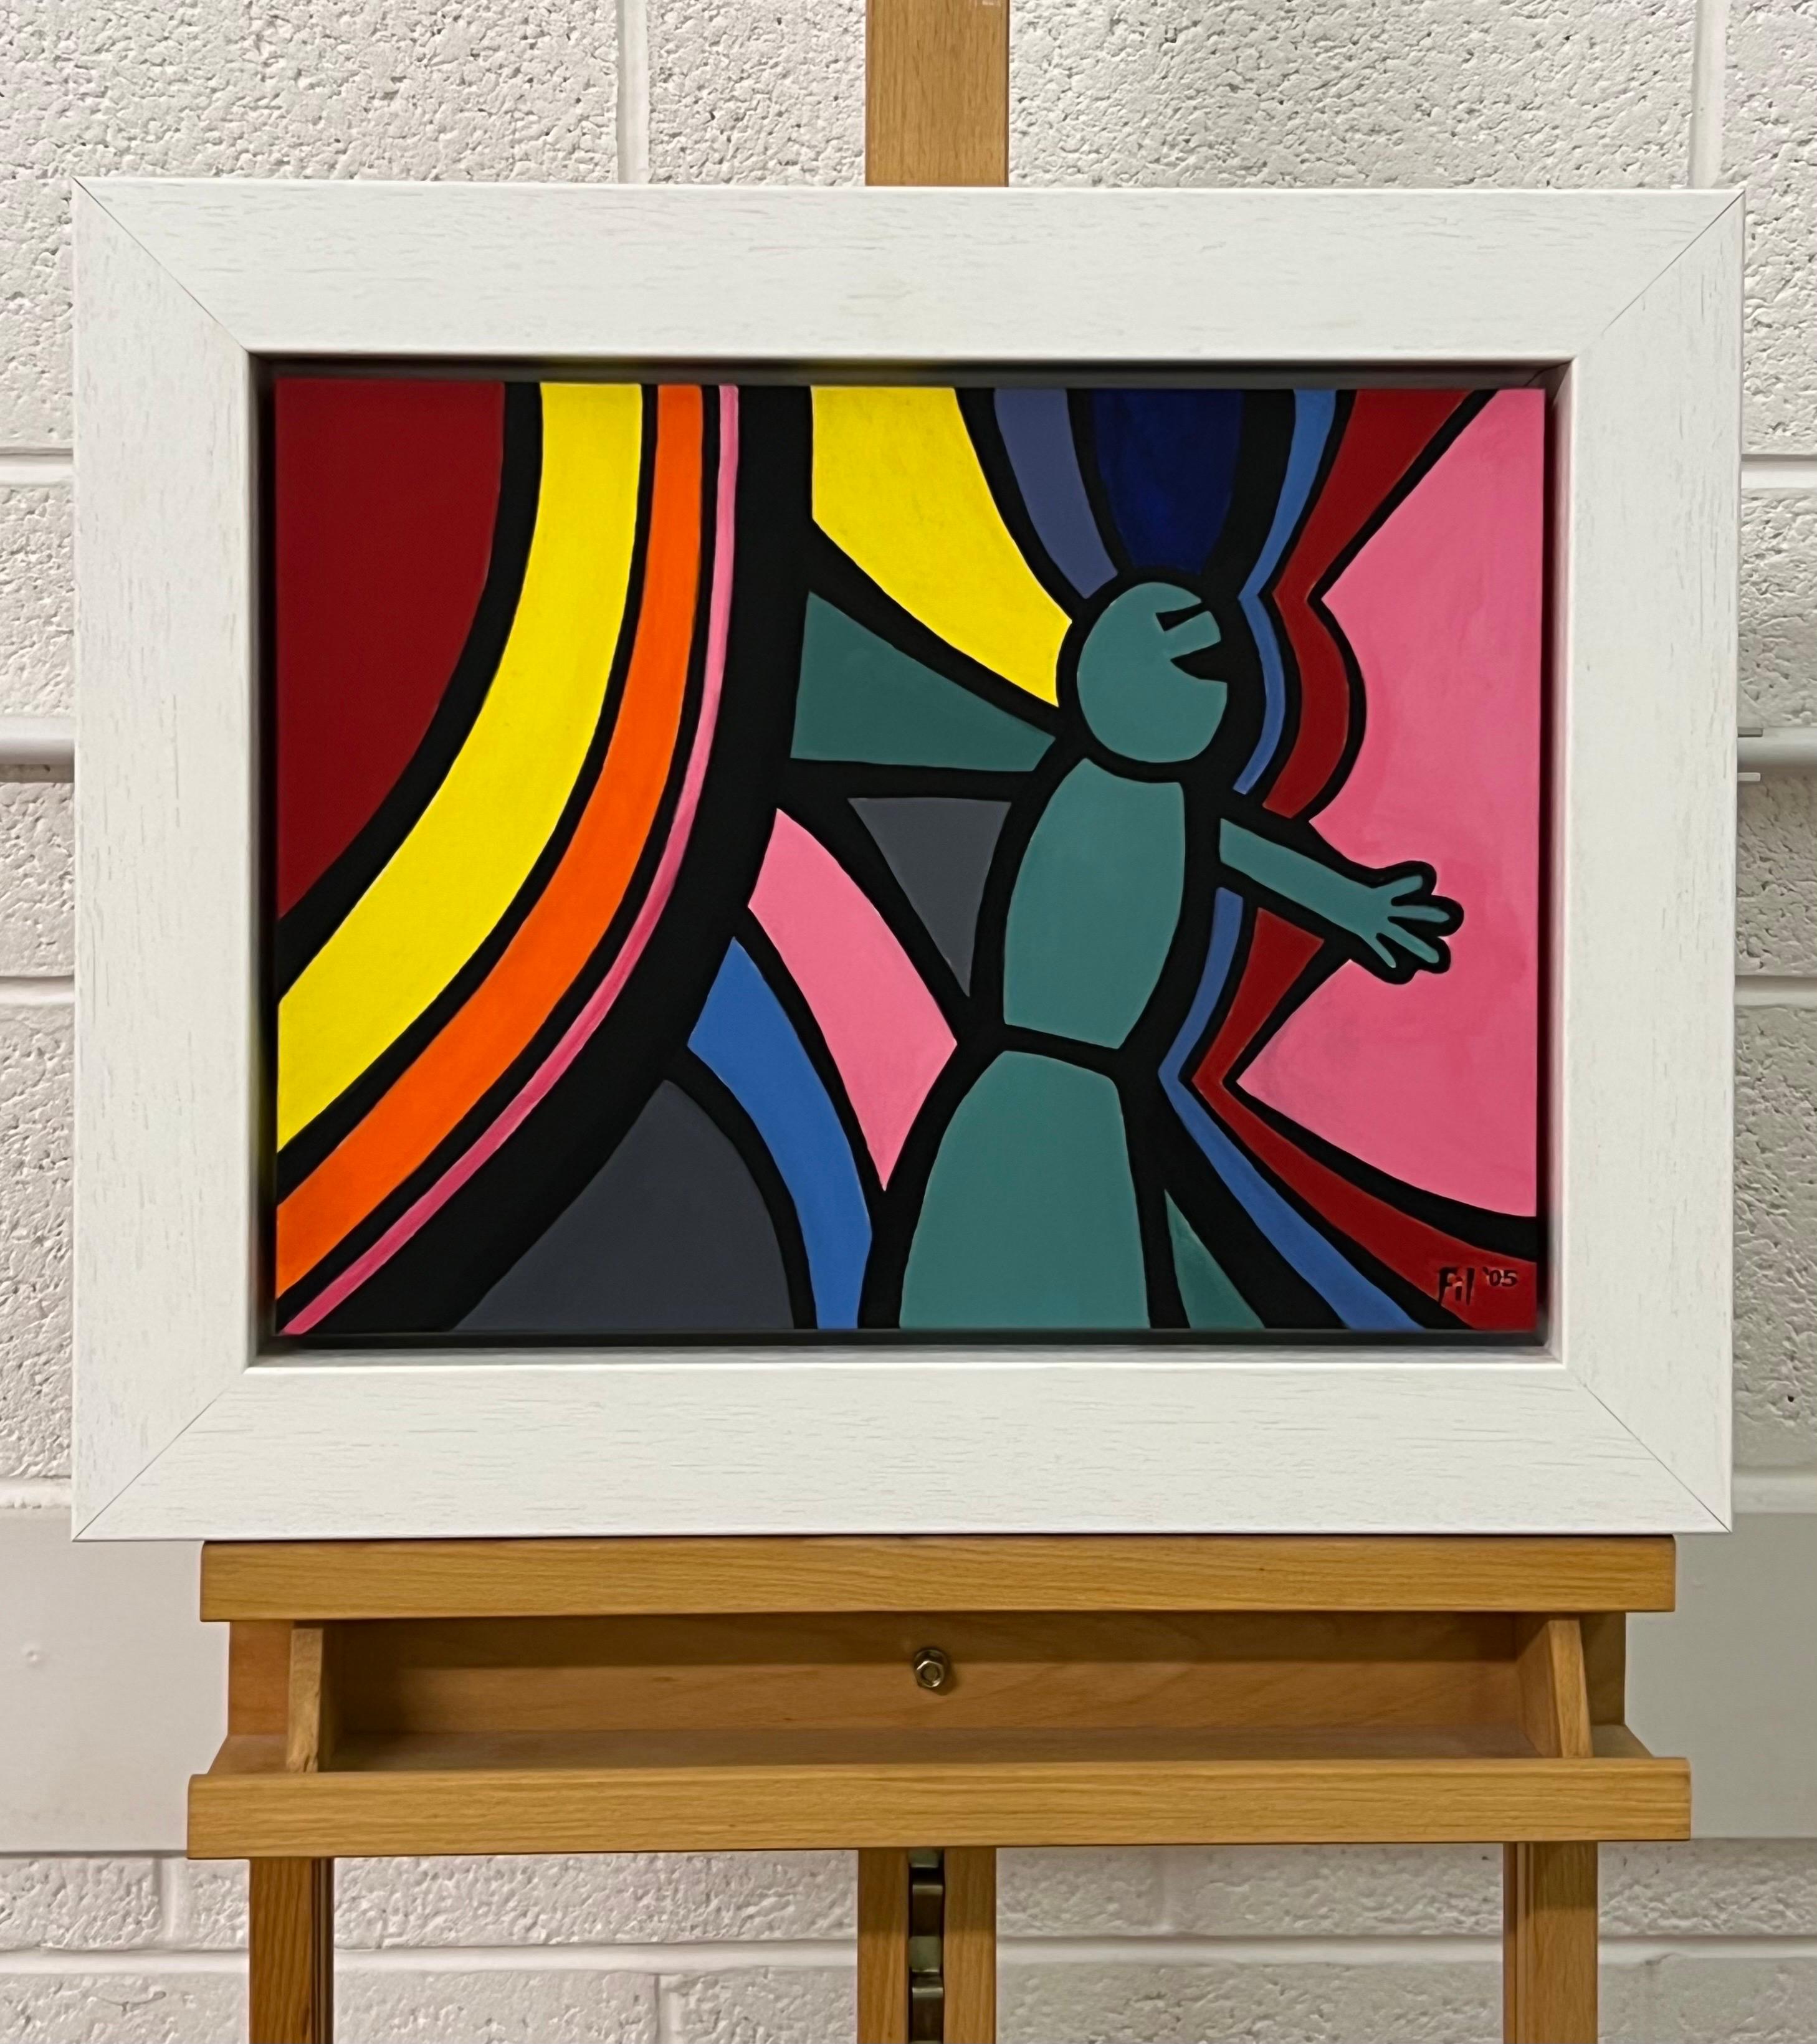 Contemporary Surreal Cartoon Pen & Ink Drawing on Canvas entitled 'Green Man' by Contemporary British Artist. A rainbow of colours emerges from the earth, as man reaches forward. Symbolic visionary art from creative drawings, meditations &